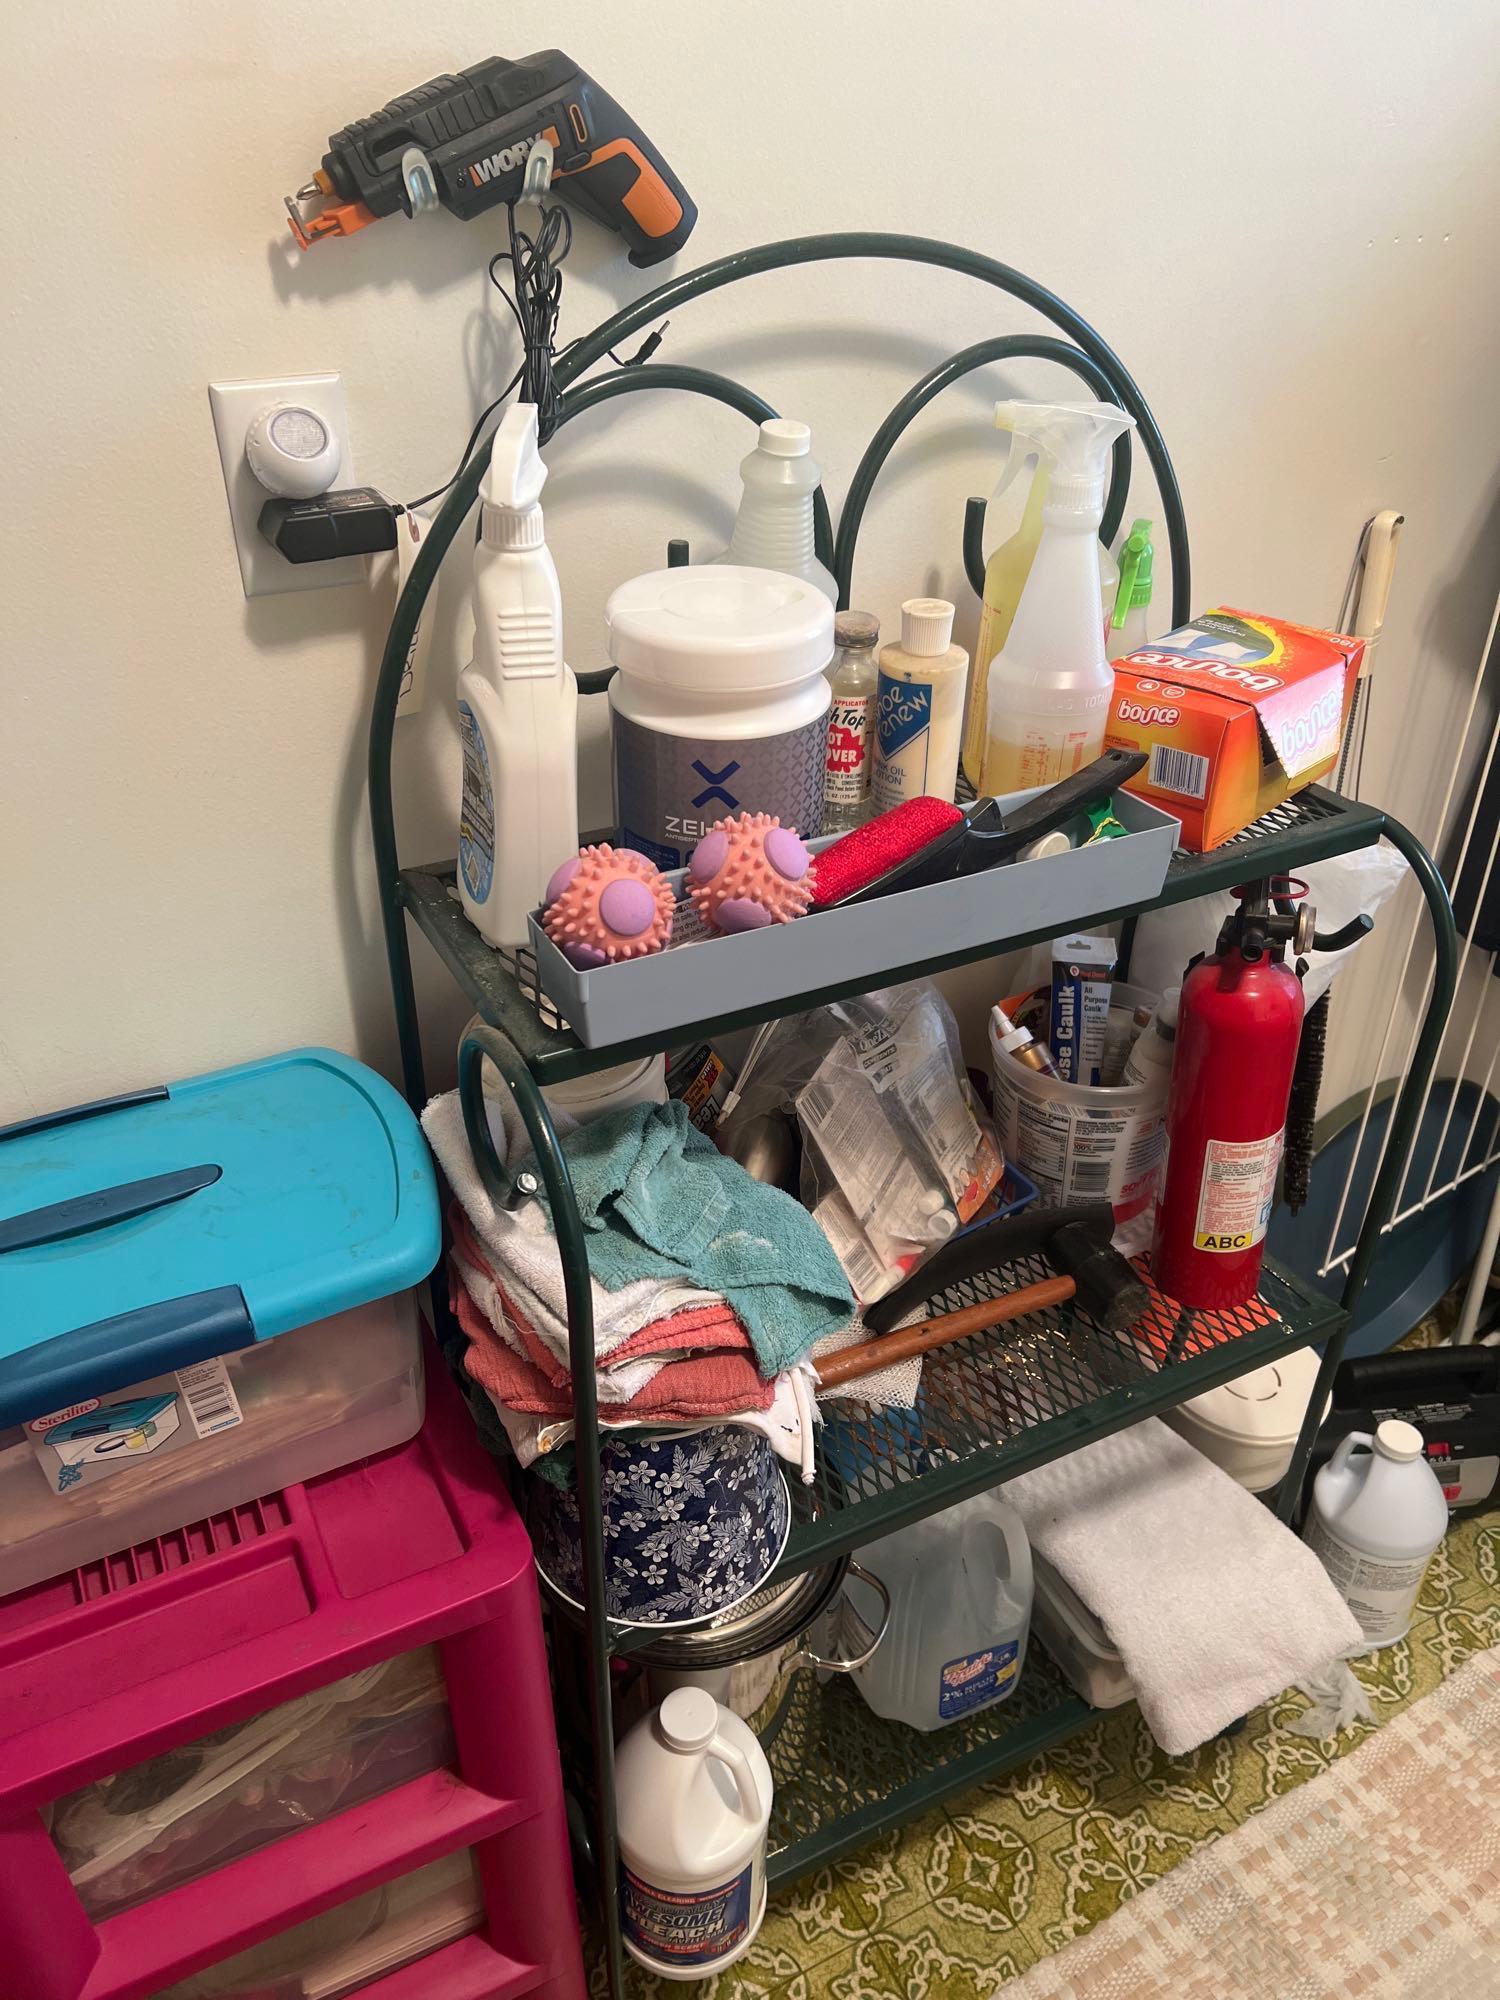 contents of laundry, room shelf and more